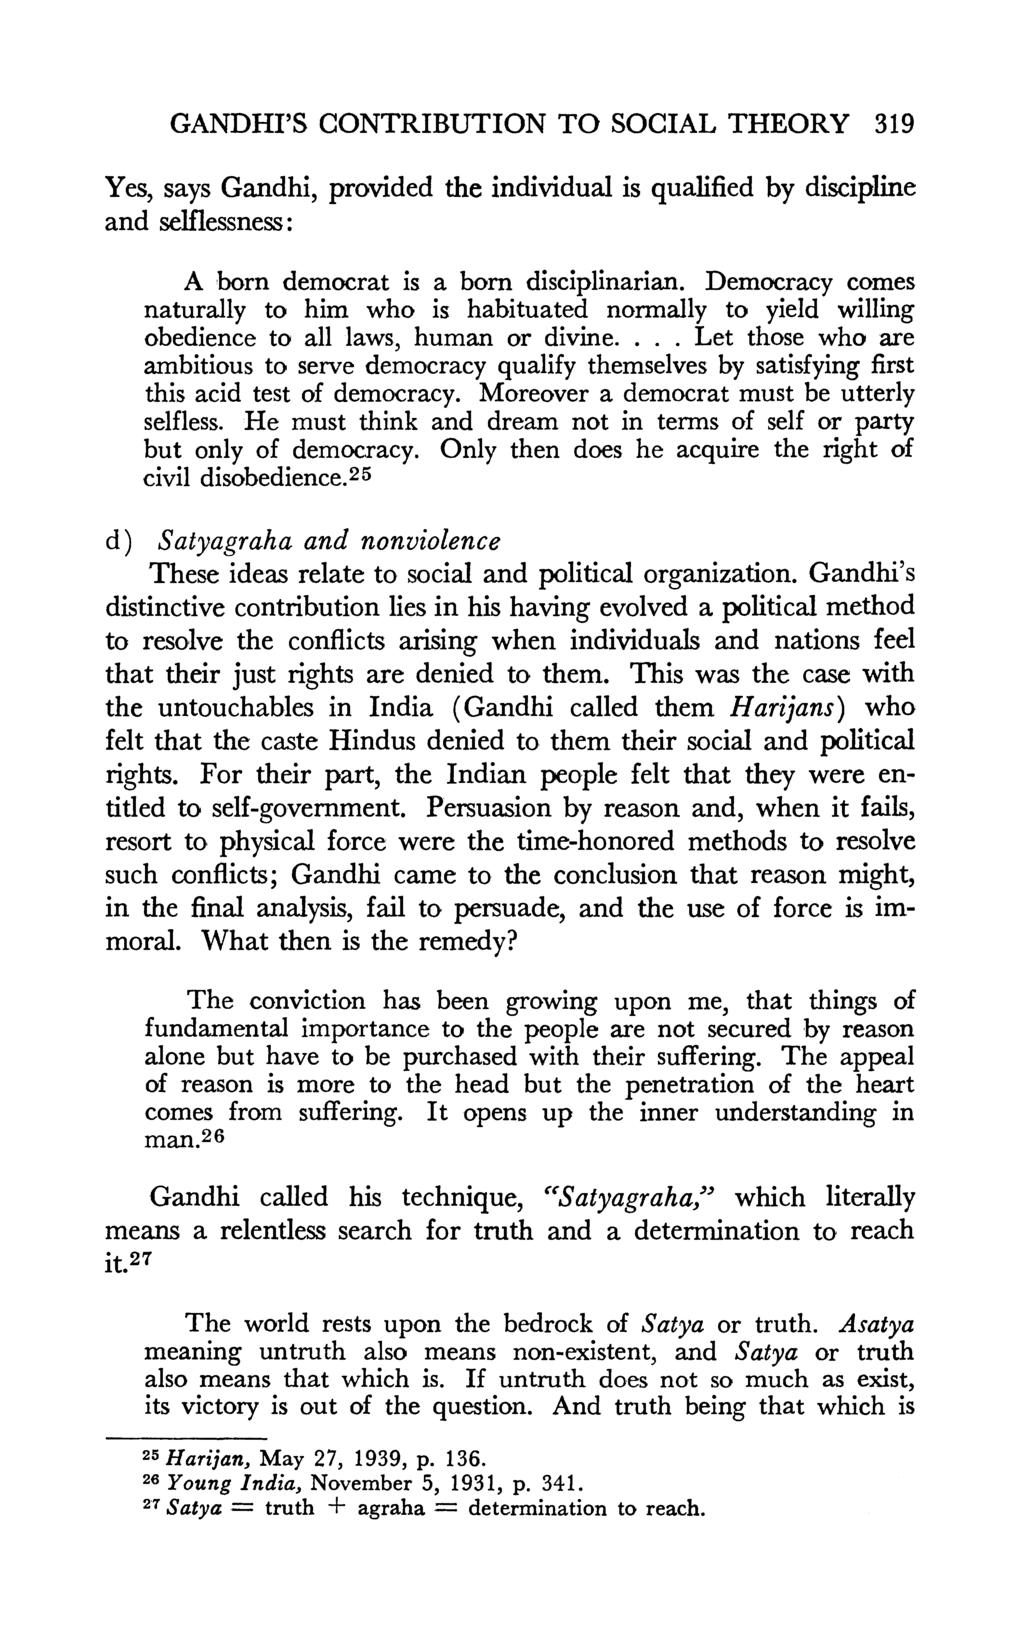 GANDHI'S CONTRIBUTION TO SOCIAL THEORY 319 Yes, says Gandhi, provided the individual is qualified by discipline and selflessness: A born democrat is a born disciplinarian.